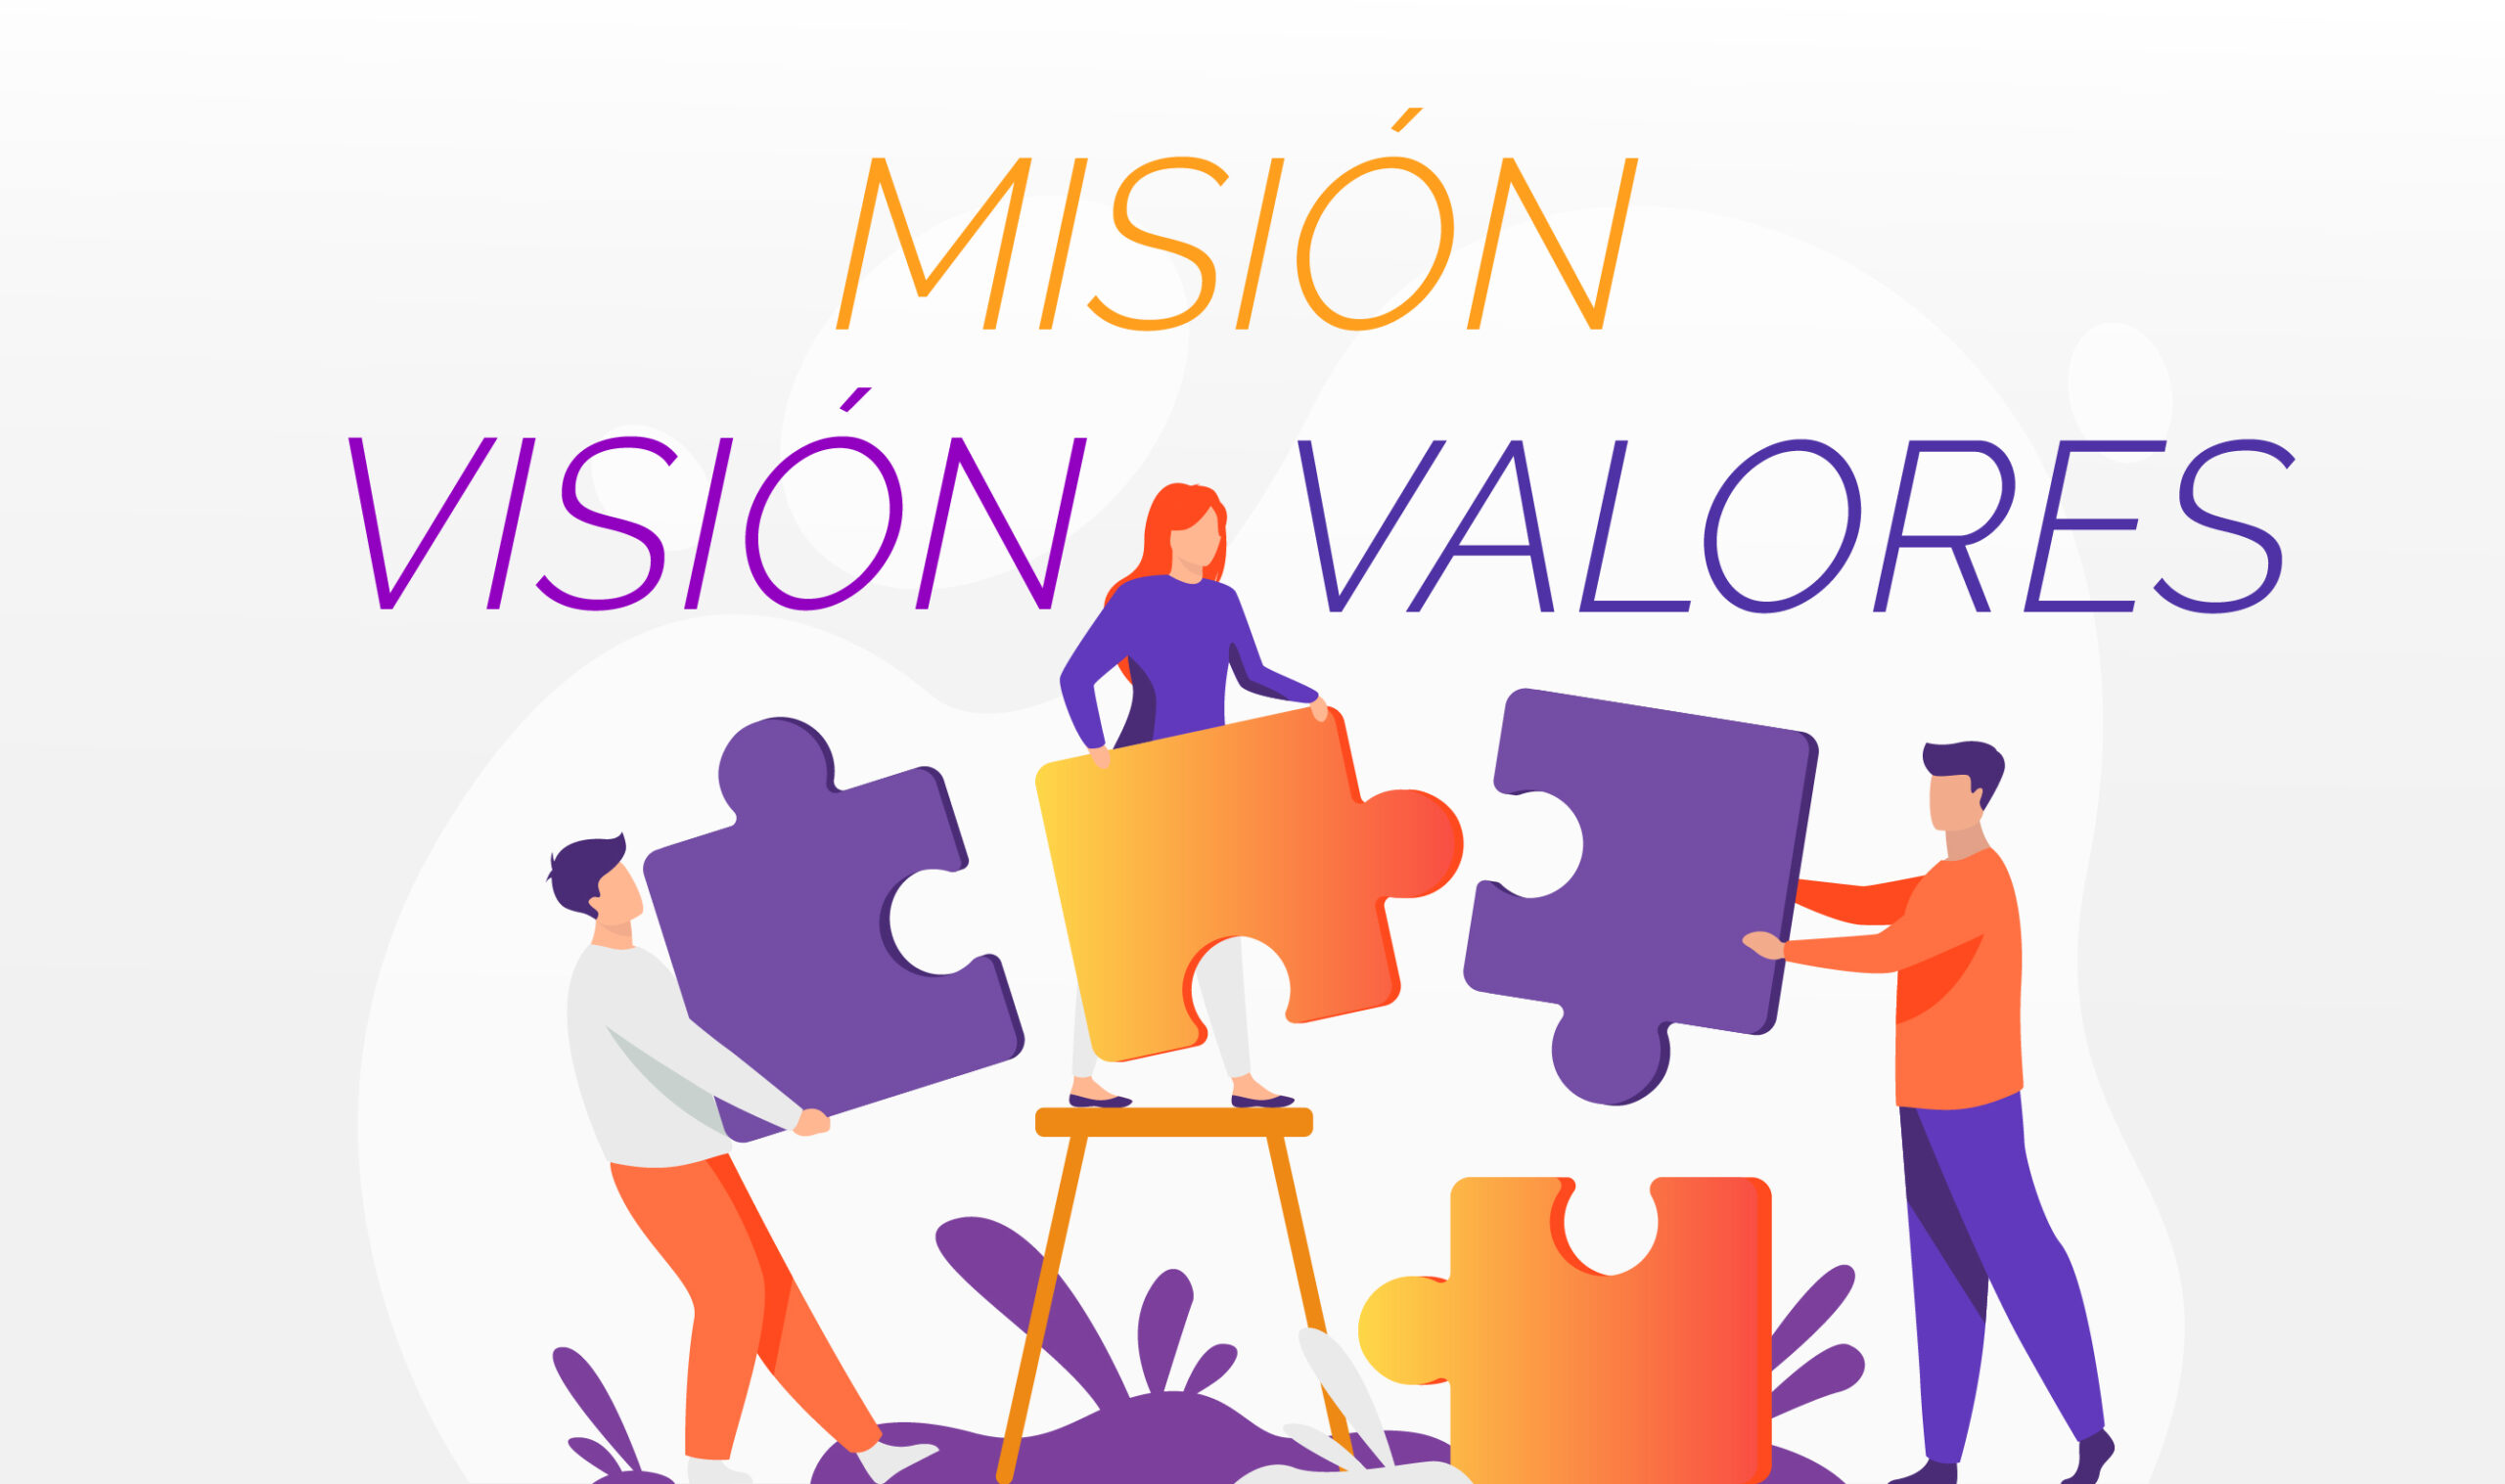 Mission, Vision, and Values...